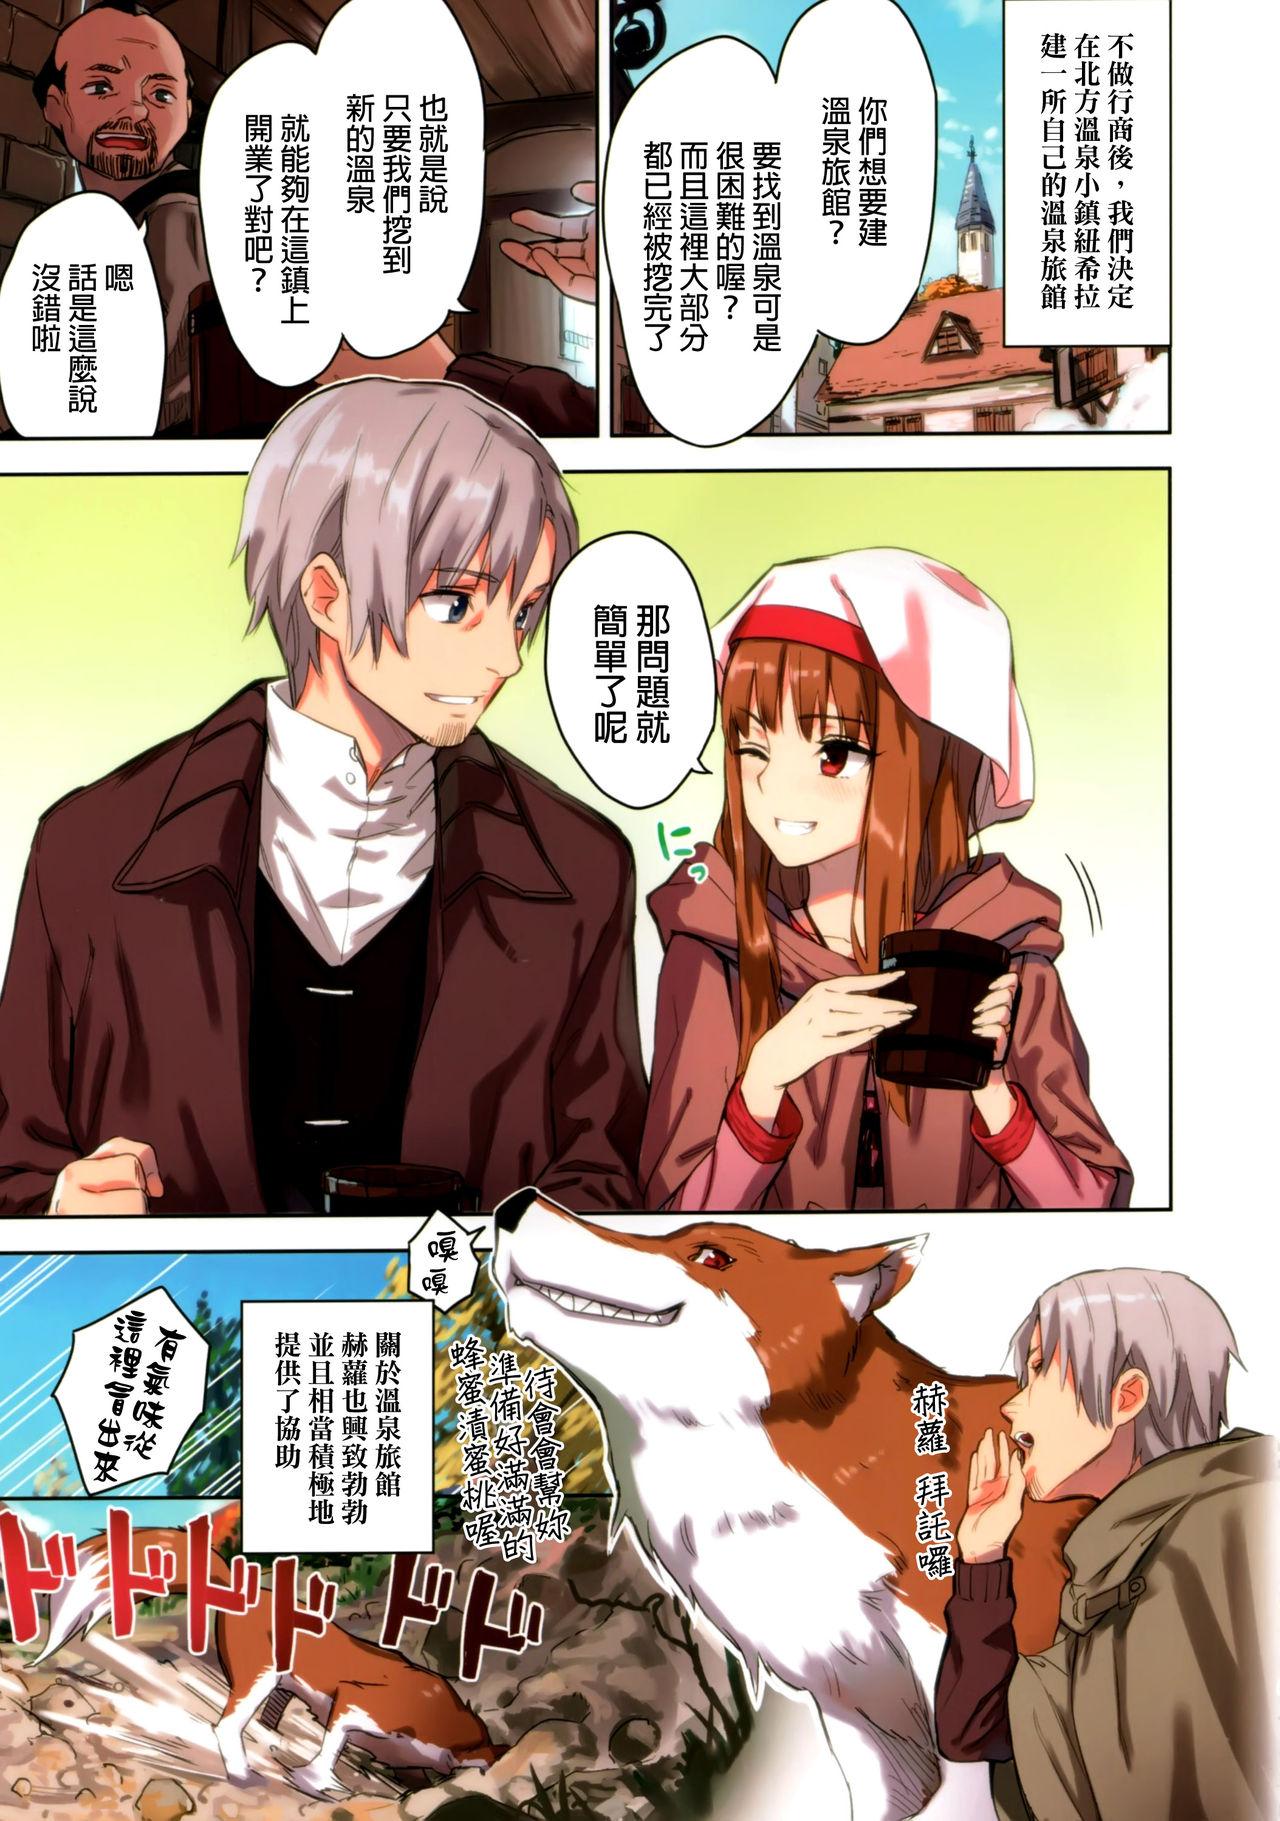 Made Wacchi to Nyohhira Bon FULL COLOR - Spice and wolf Wet Cunt - Page 6